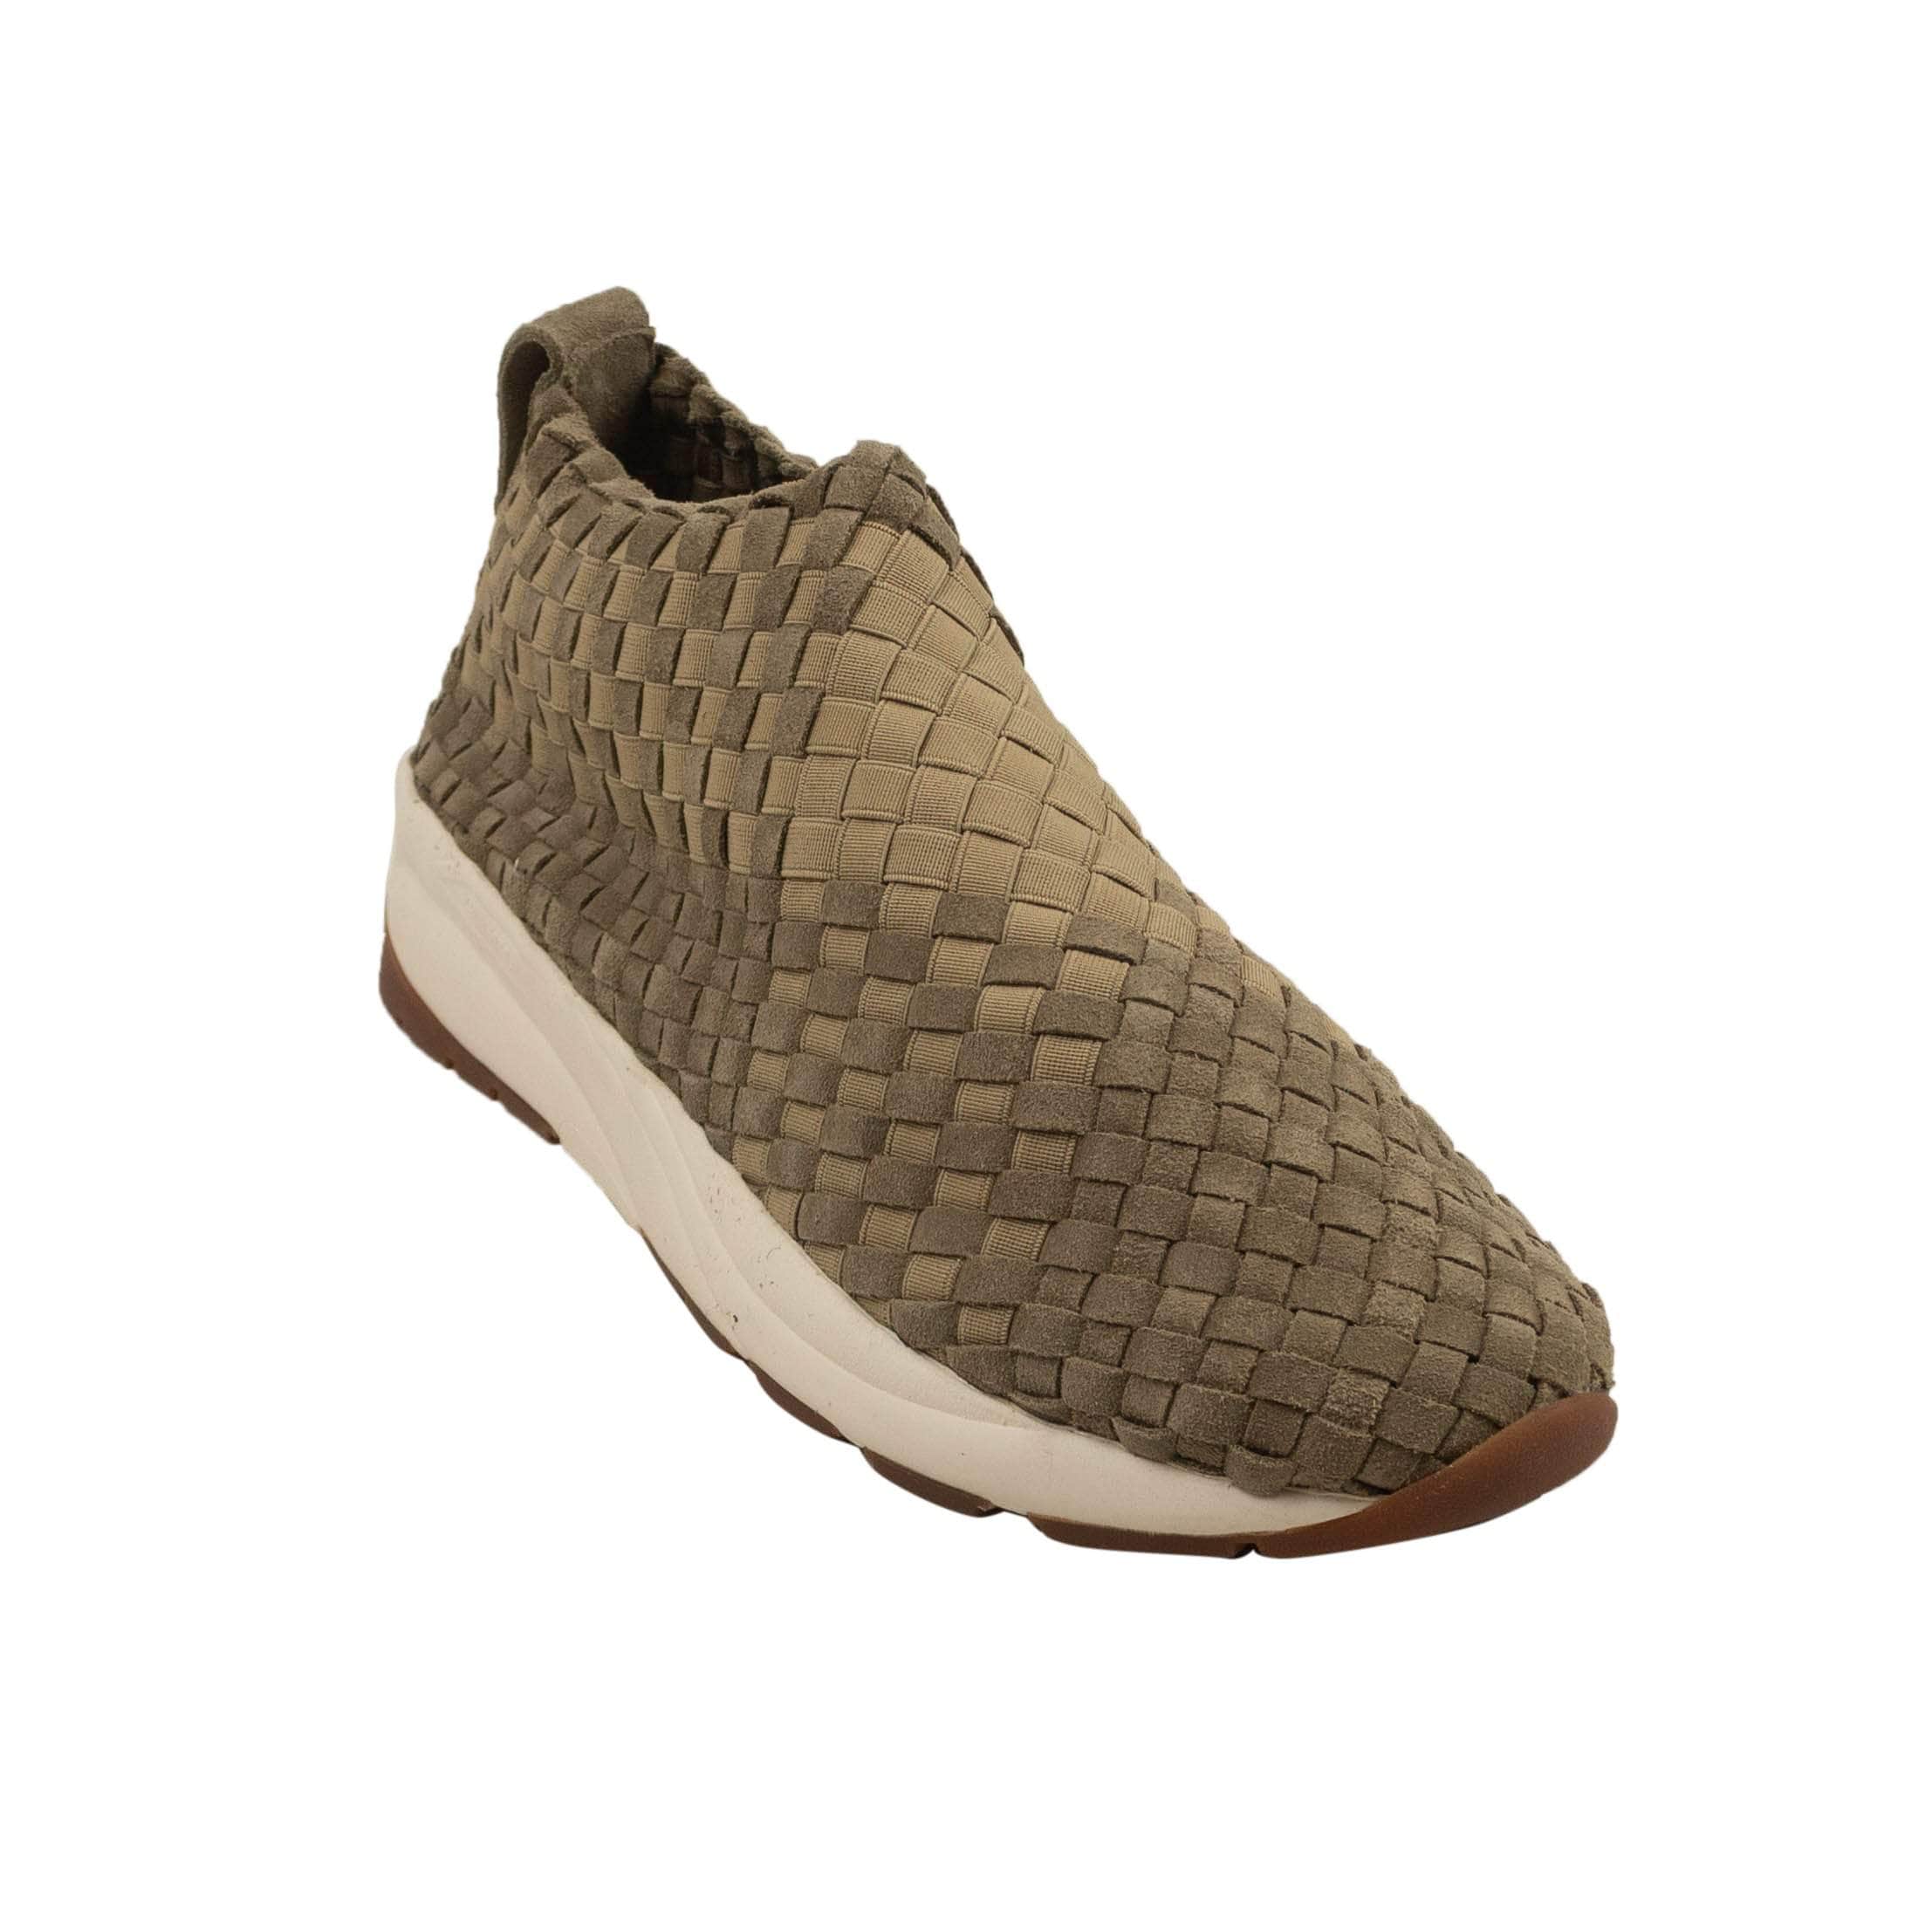 Casbia casbia, channelenable-all, chicmi, couponcollection, gender-mens, main-shoes, mens-shoes, MixedApparel, size-40, size-41, size-42, size-43, size-44, size-45, size-46, under-250 Beige Man Rev Slip On Sneakers